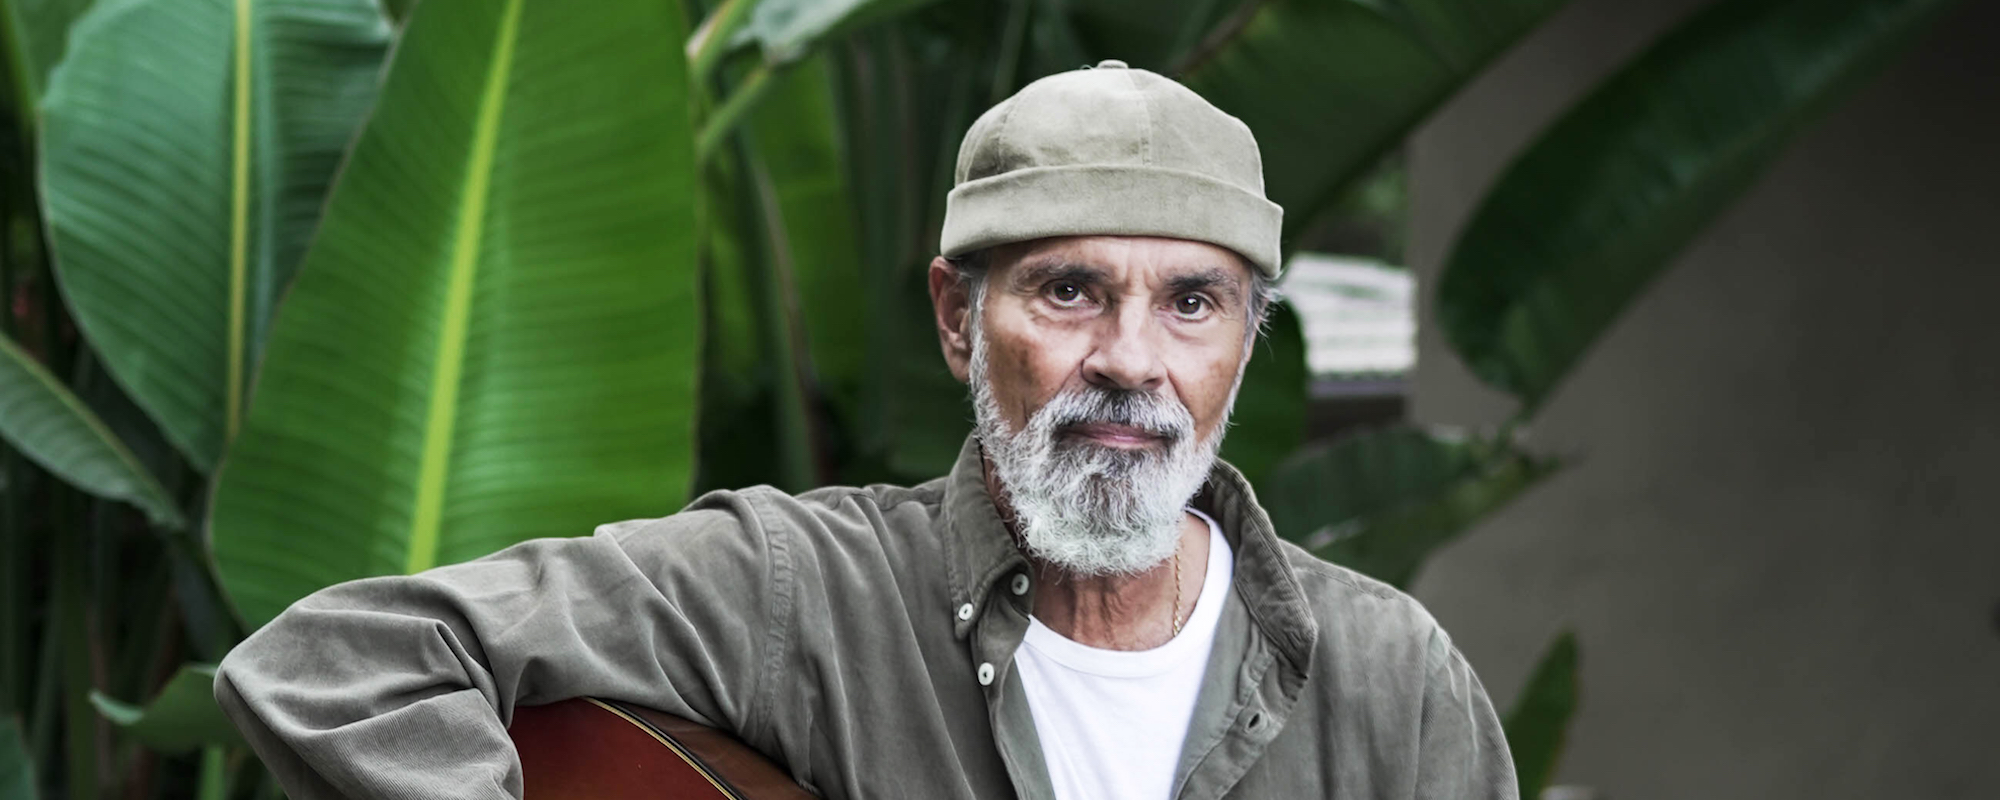 Bruce Sudano Finesses New Melodies on “Ode to a Nightingale”